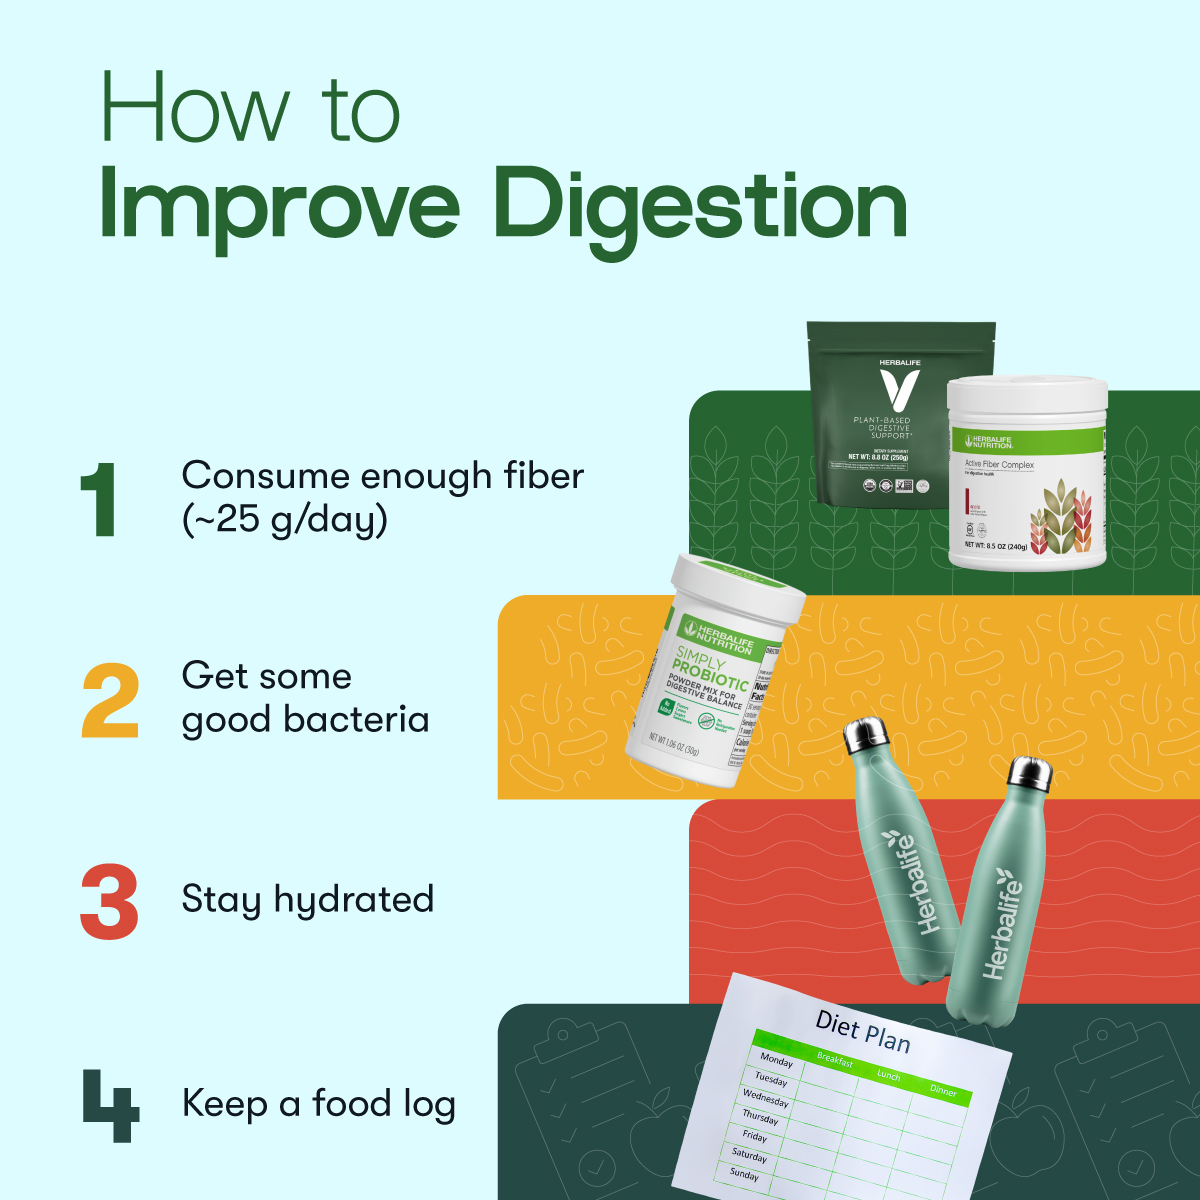 Incorporate more fiber 🥦 and plant-based options 🌱 into your diet for a healthier and happier gut. #DigestionGoals #Herbalife #SimplyProbiotics #HerbalifeV #ActiveFiberComplex